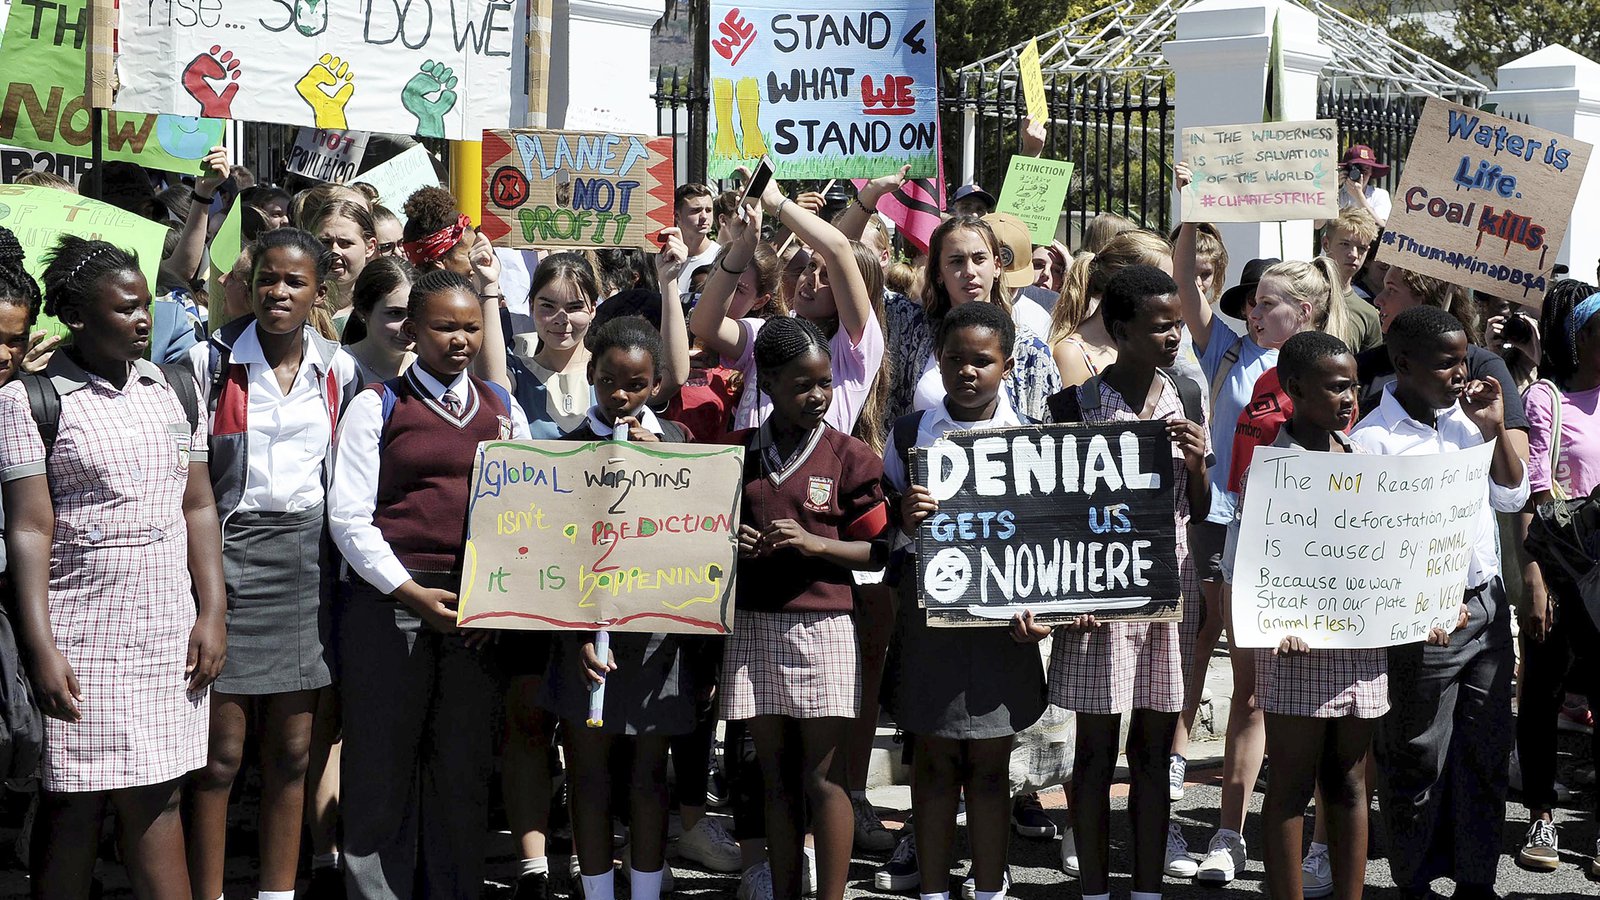 The youth speak up on climate change